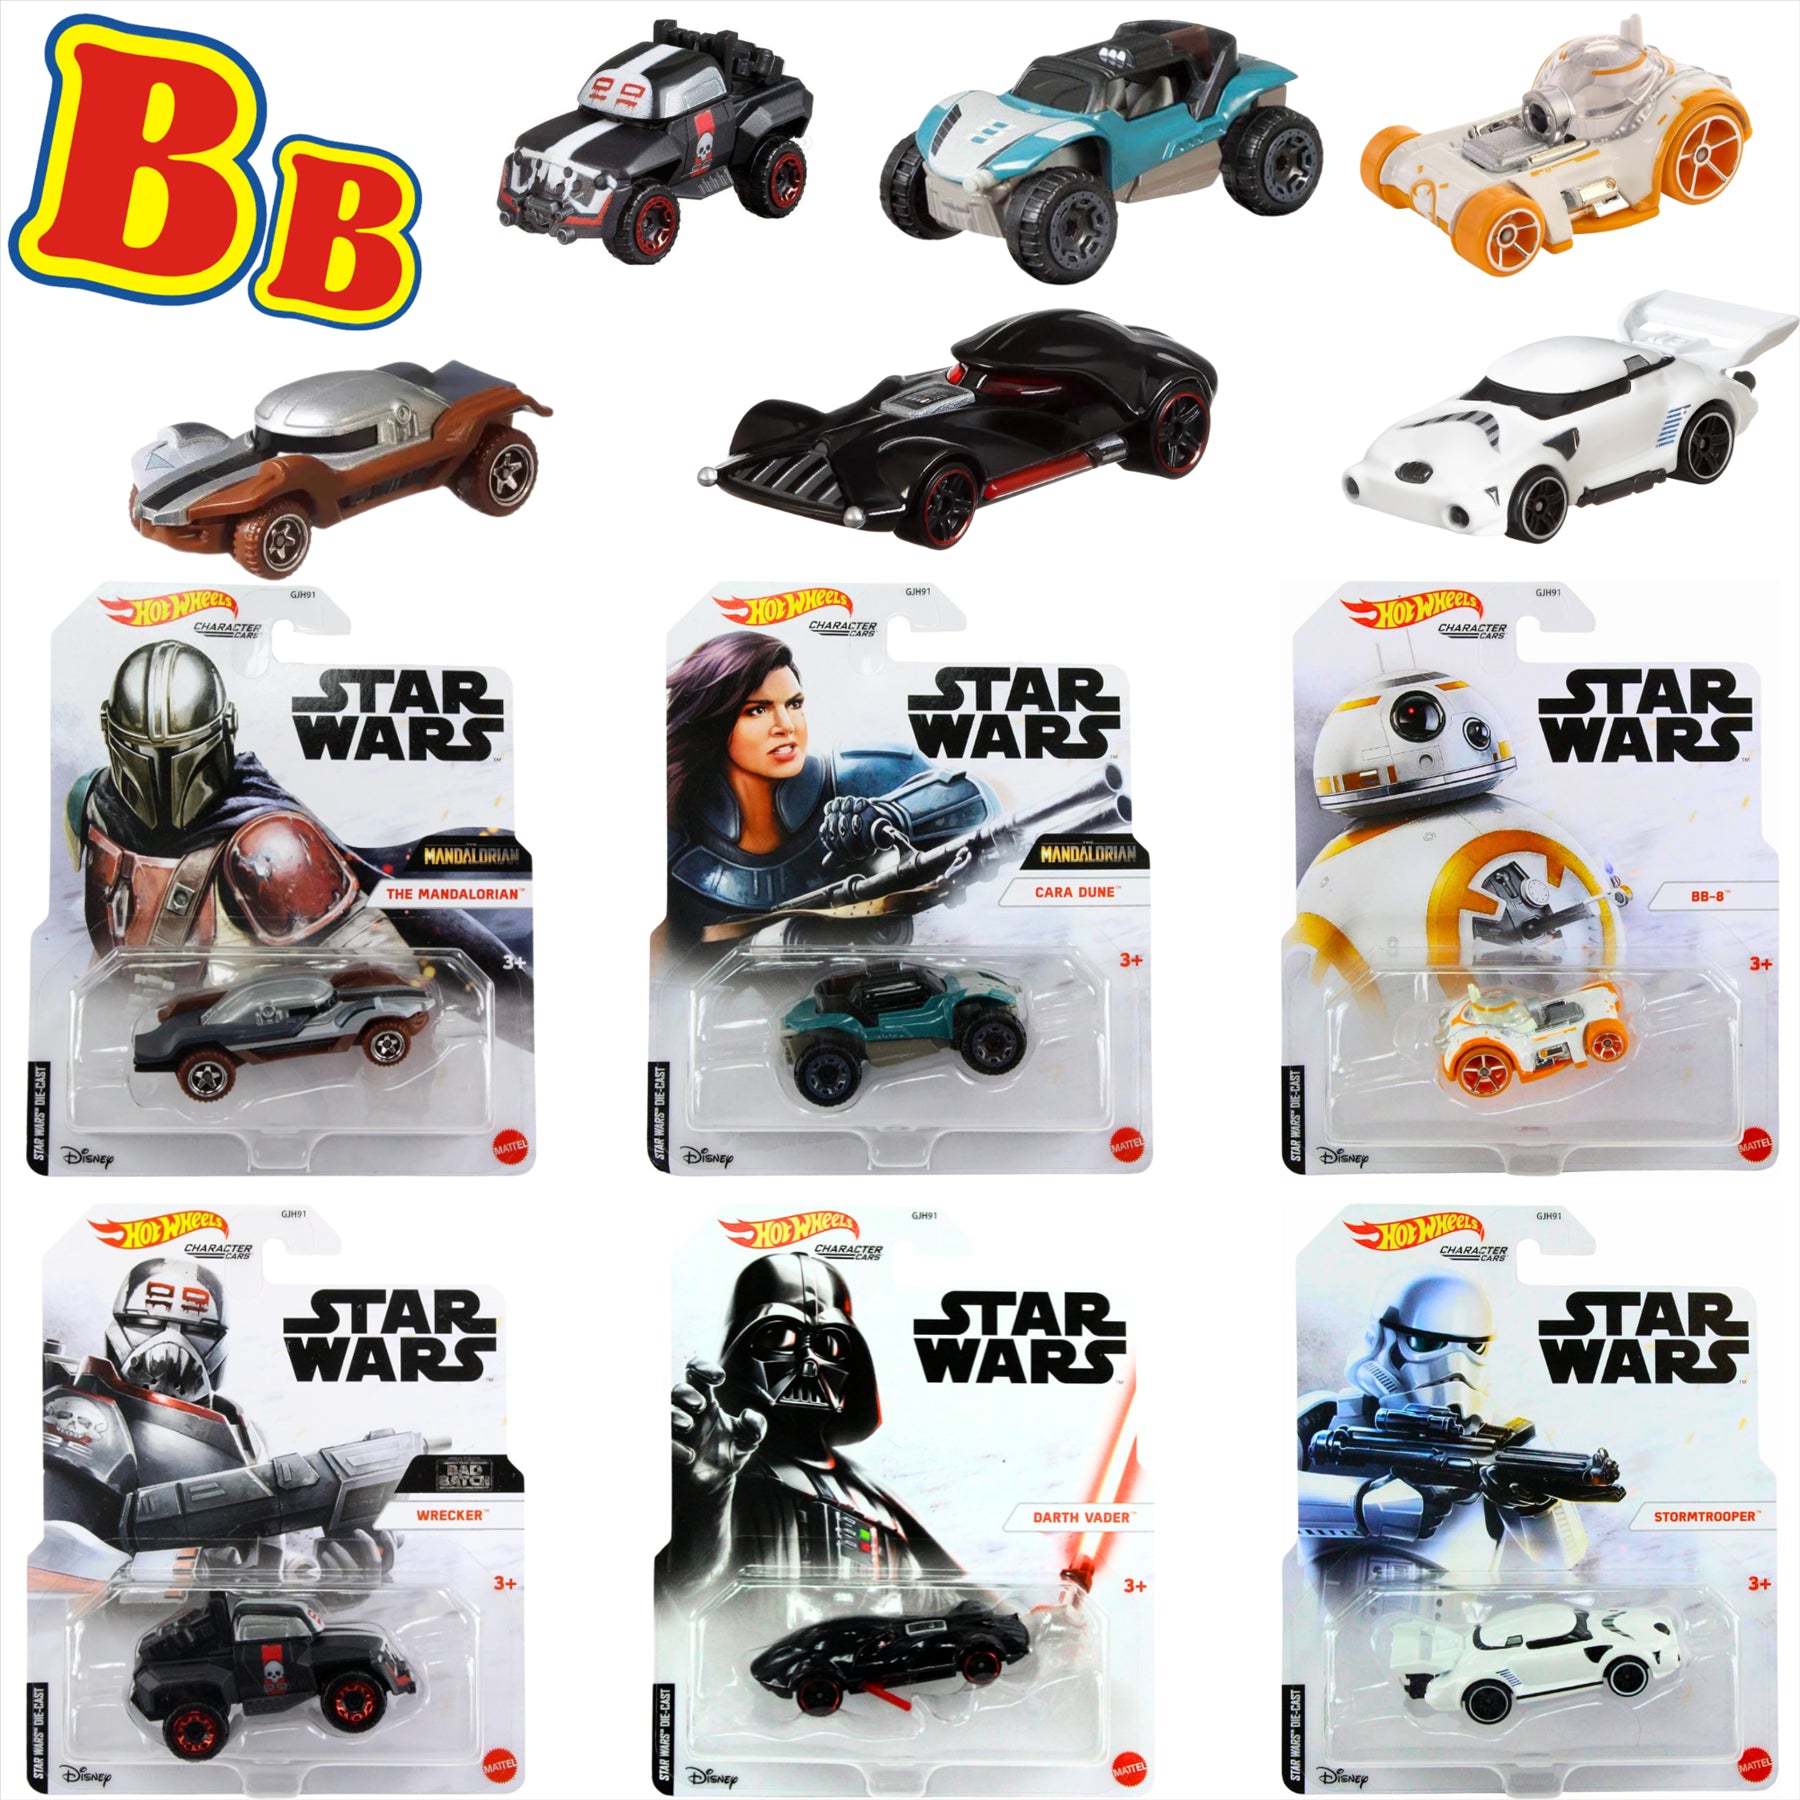 Hot Wheels Star Wars Character Cars 1:64 Scale Diecast - Complete Set of 6 - Toptoys2u